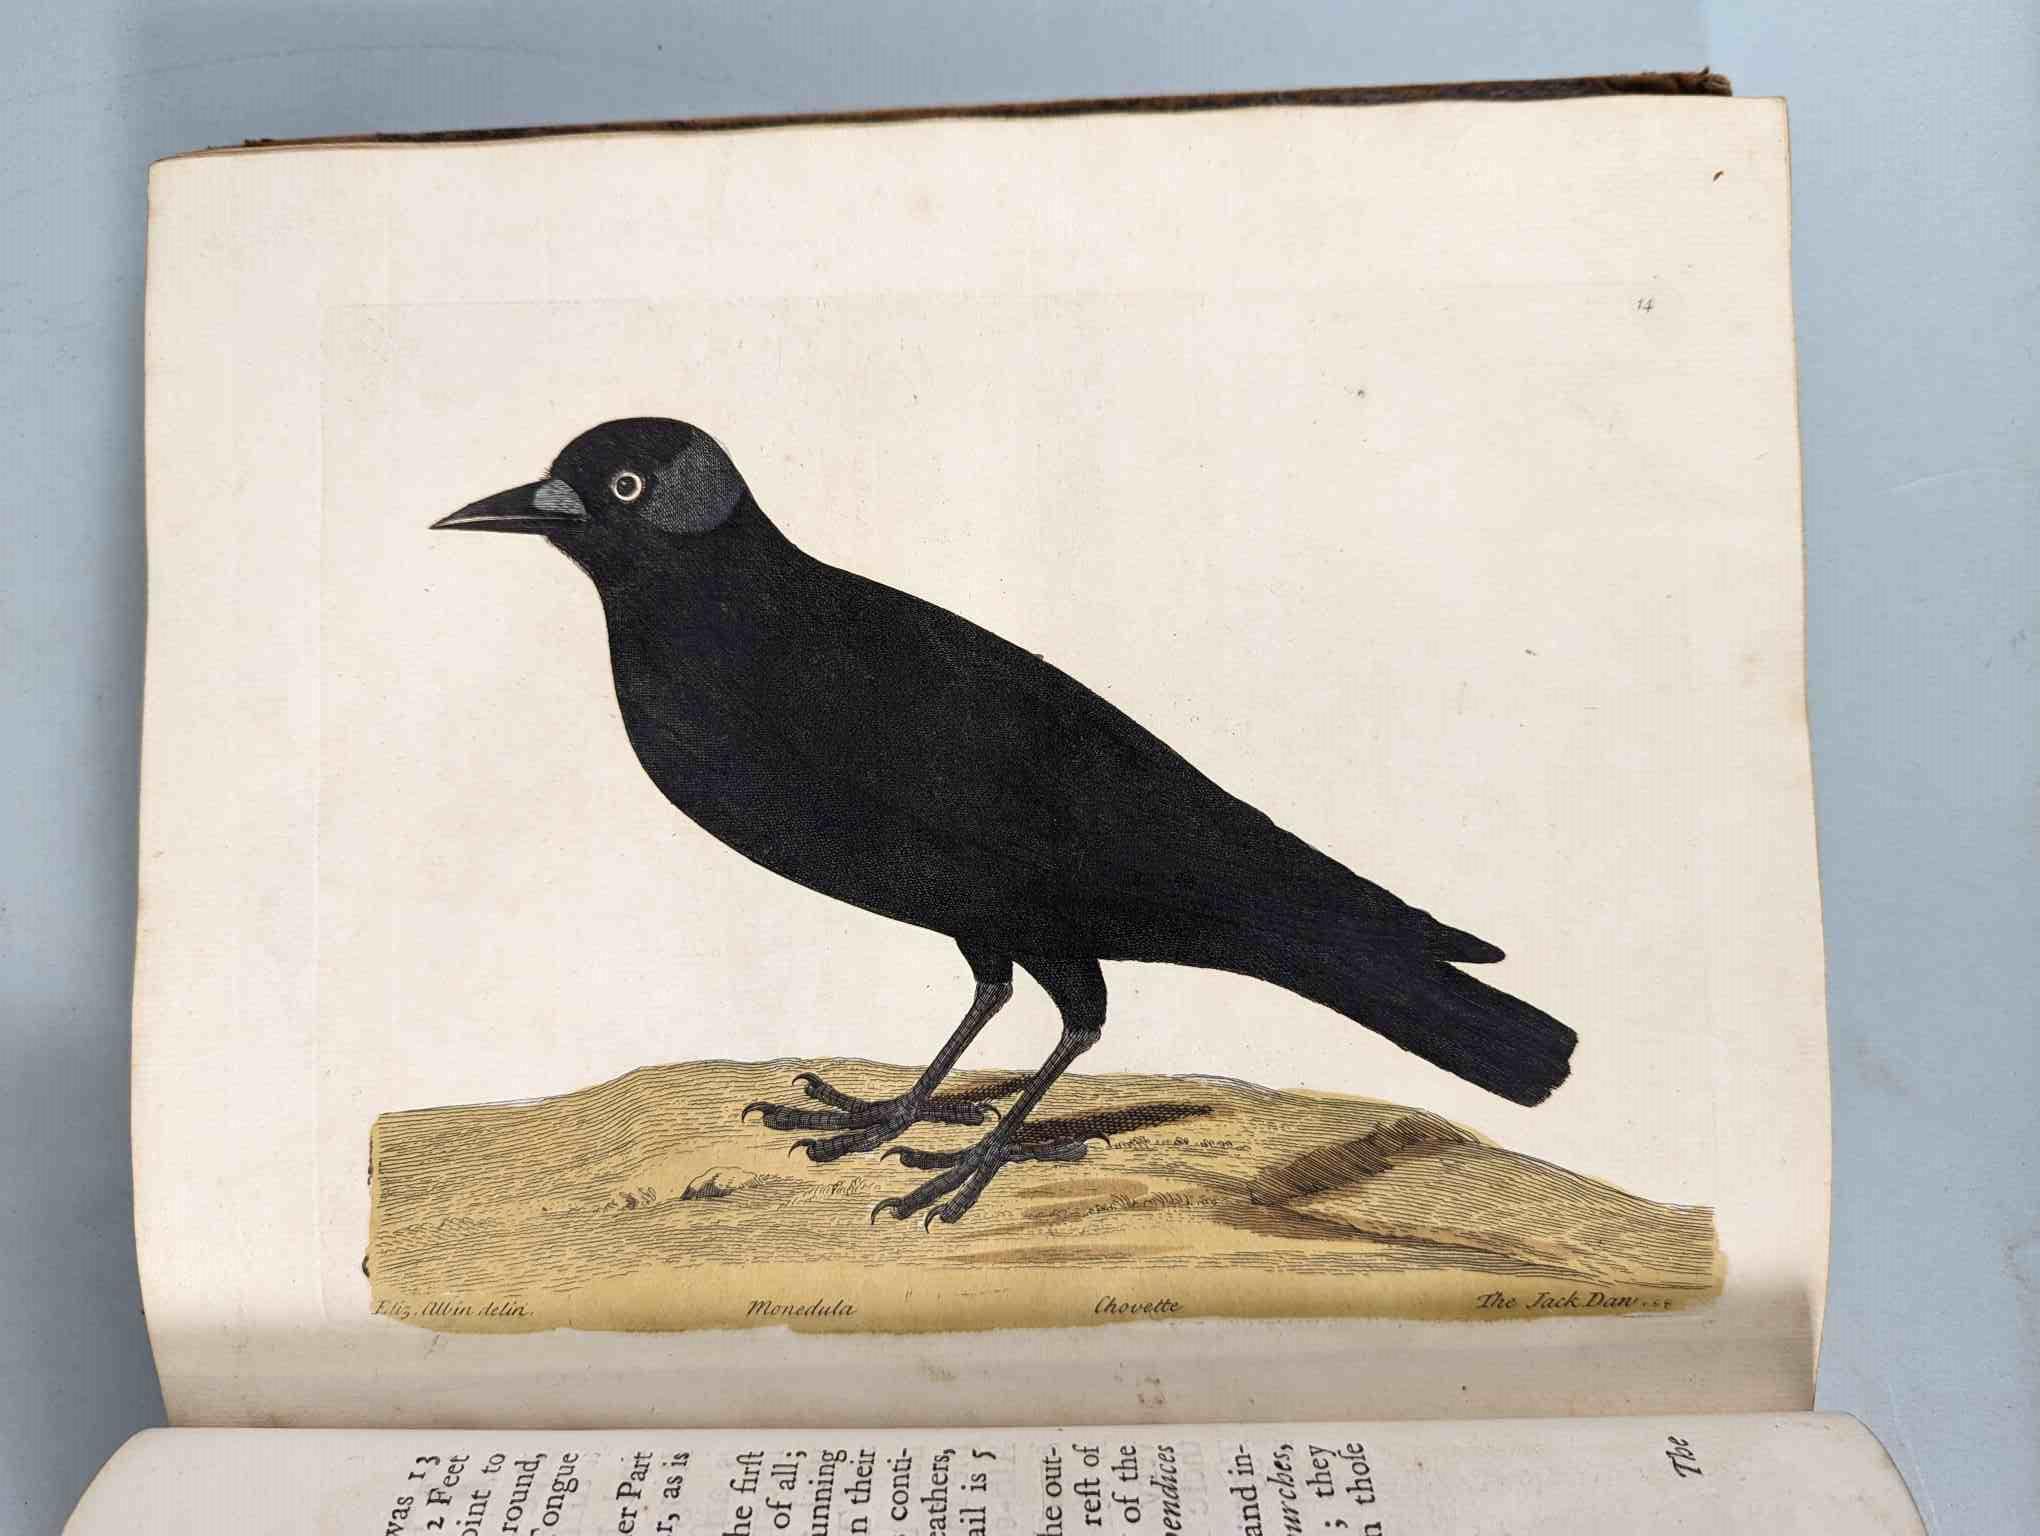 ALBIN, Eleazar. A Natural History of Birds, to which are added, Notes and Observations by W. - Image 17 of 208